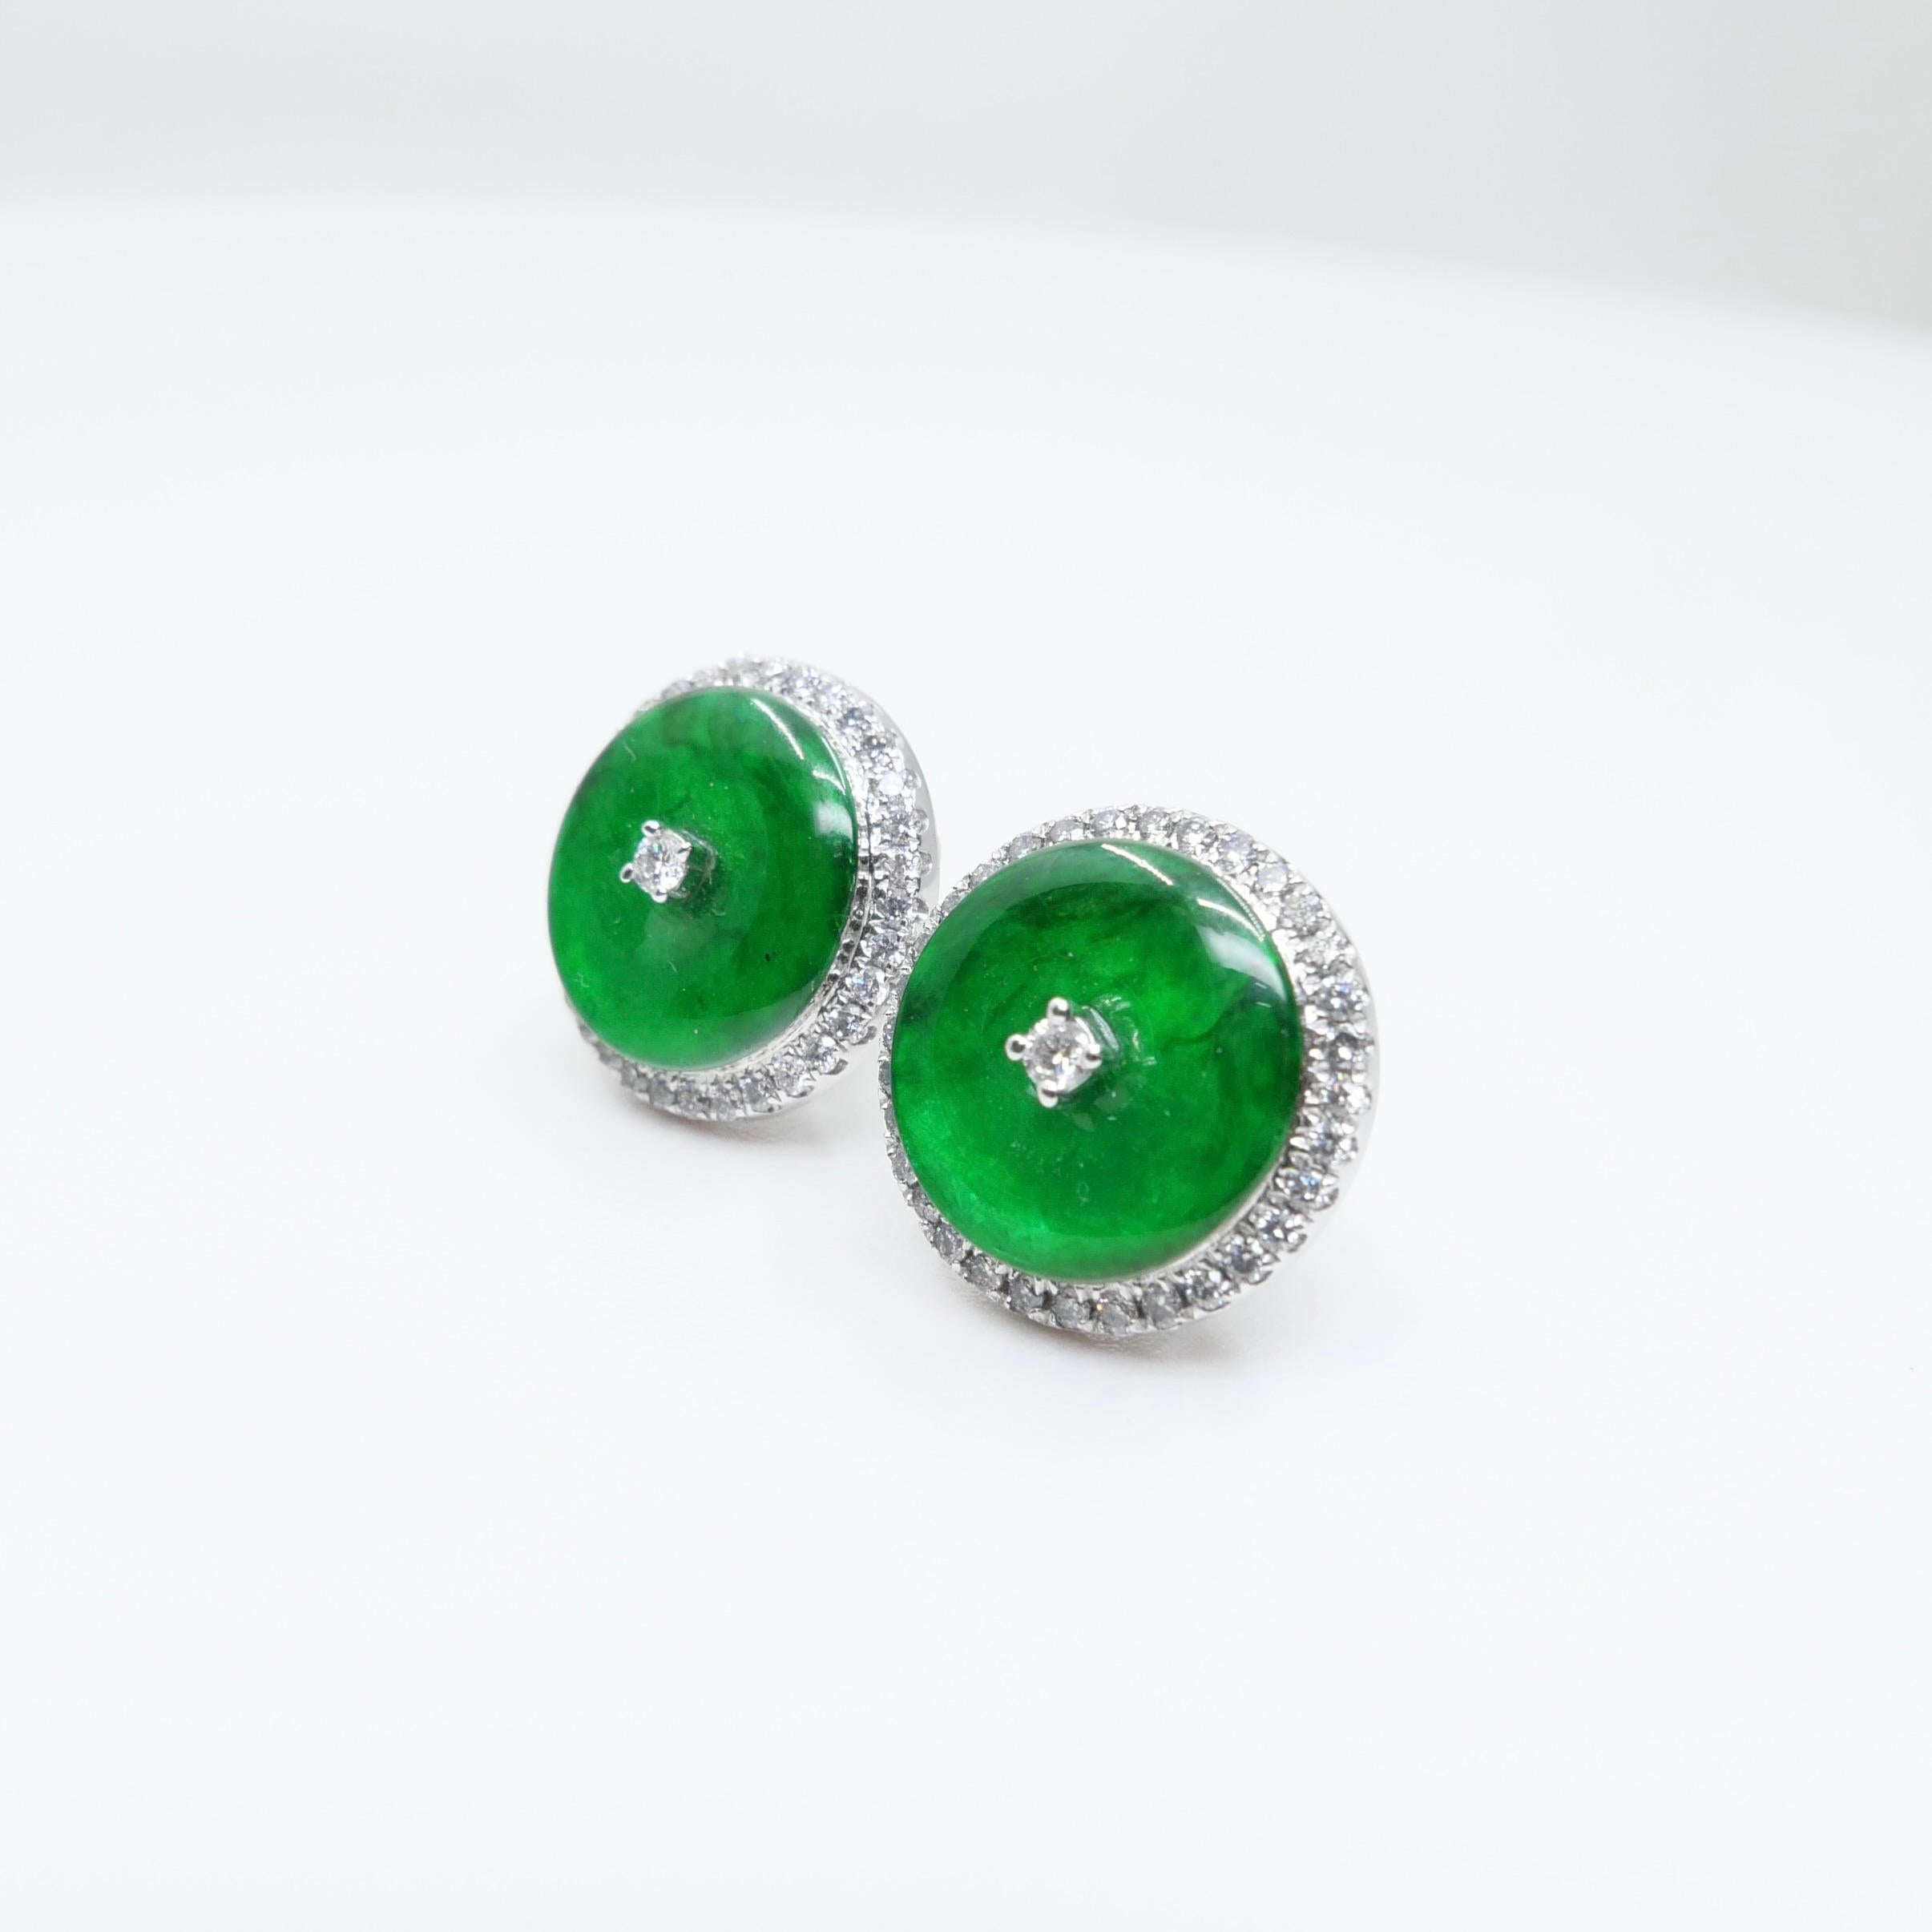 Certified Natural Type A Jadeite Jade And Diamond Earrings. Apple Green Color 5